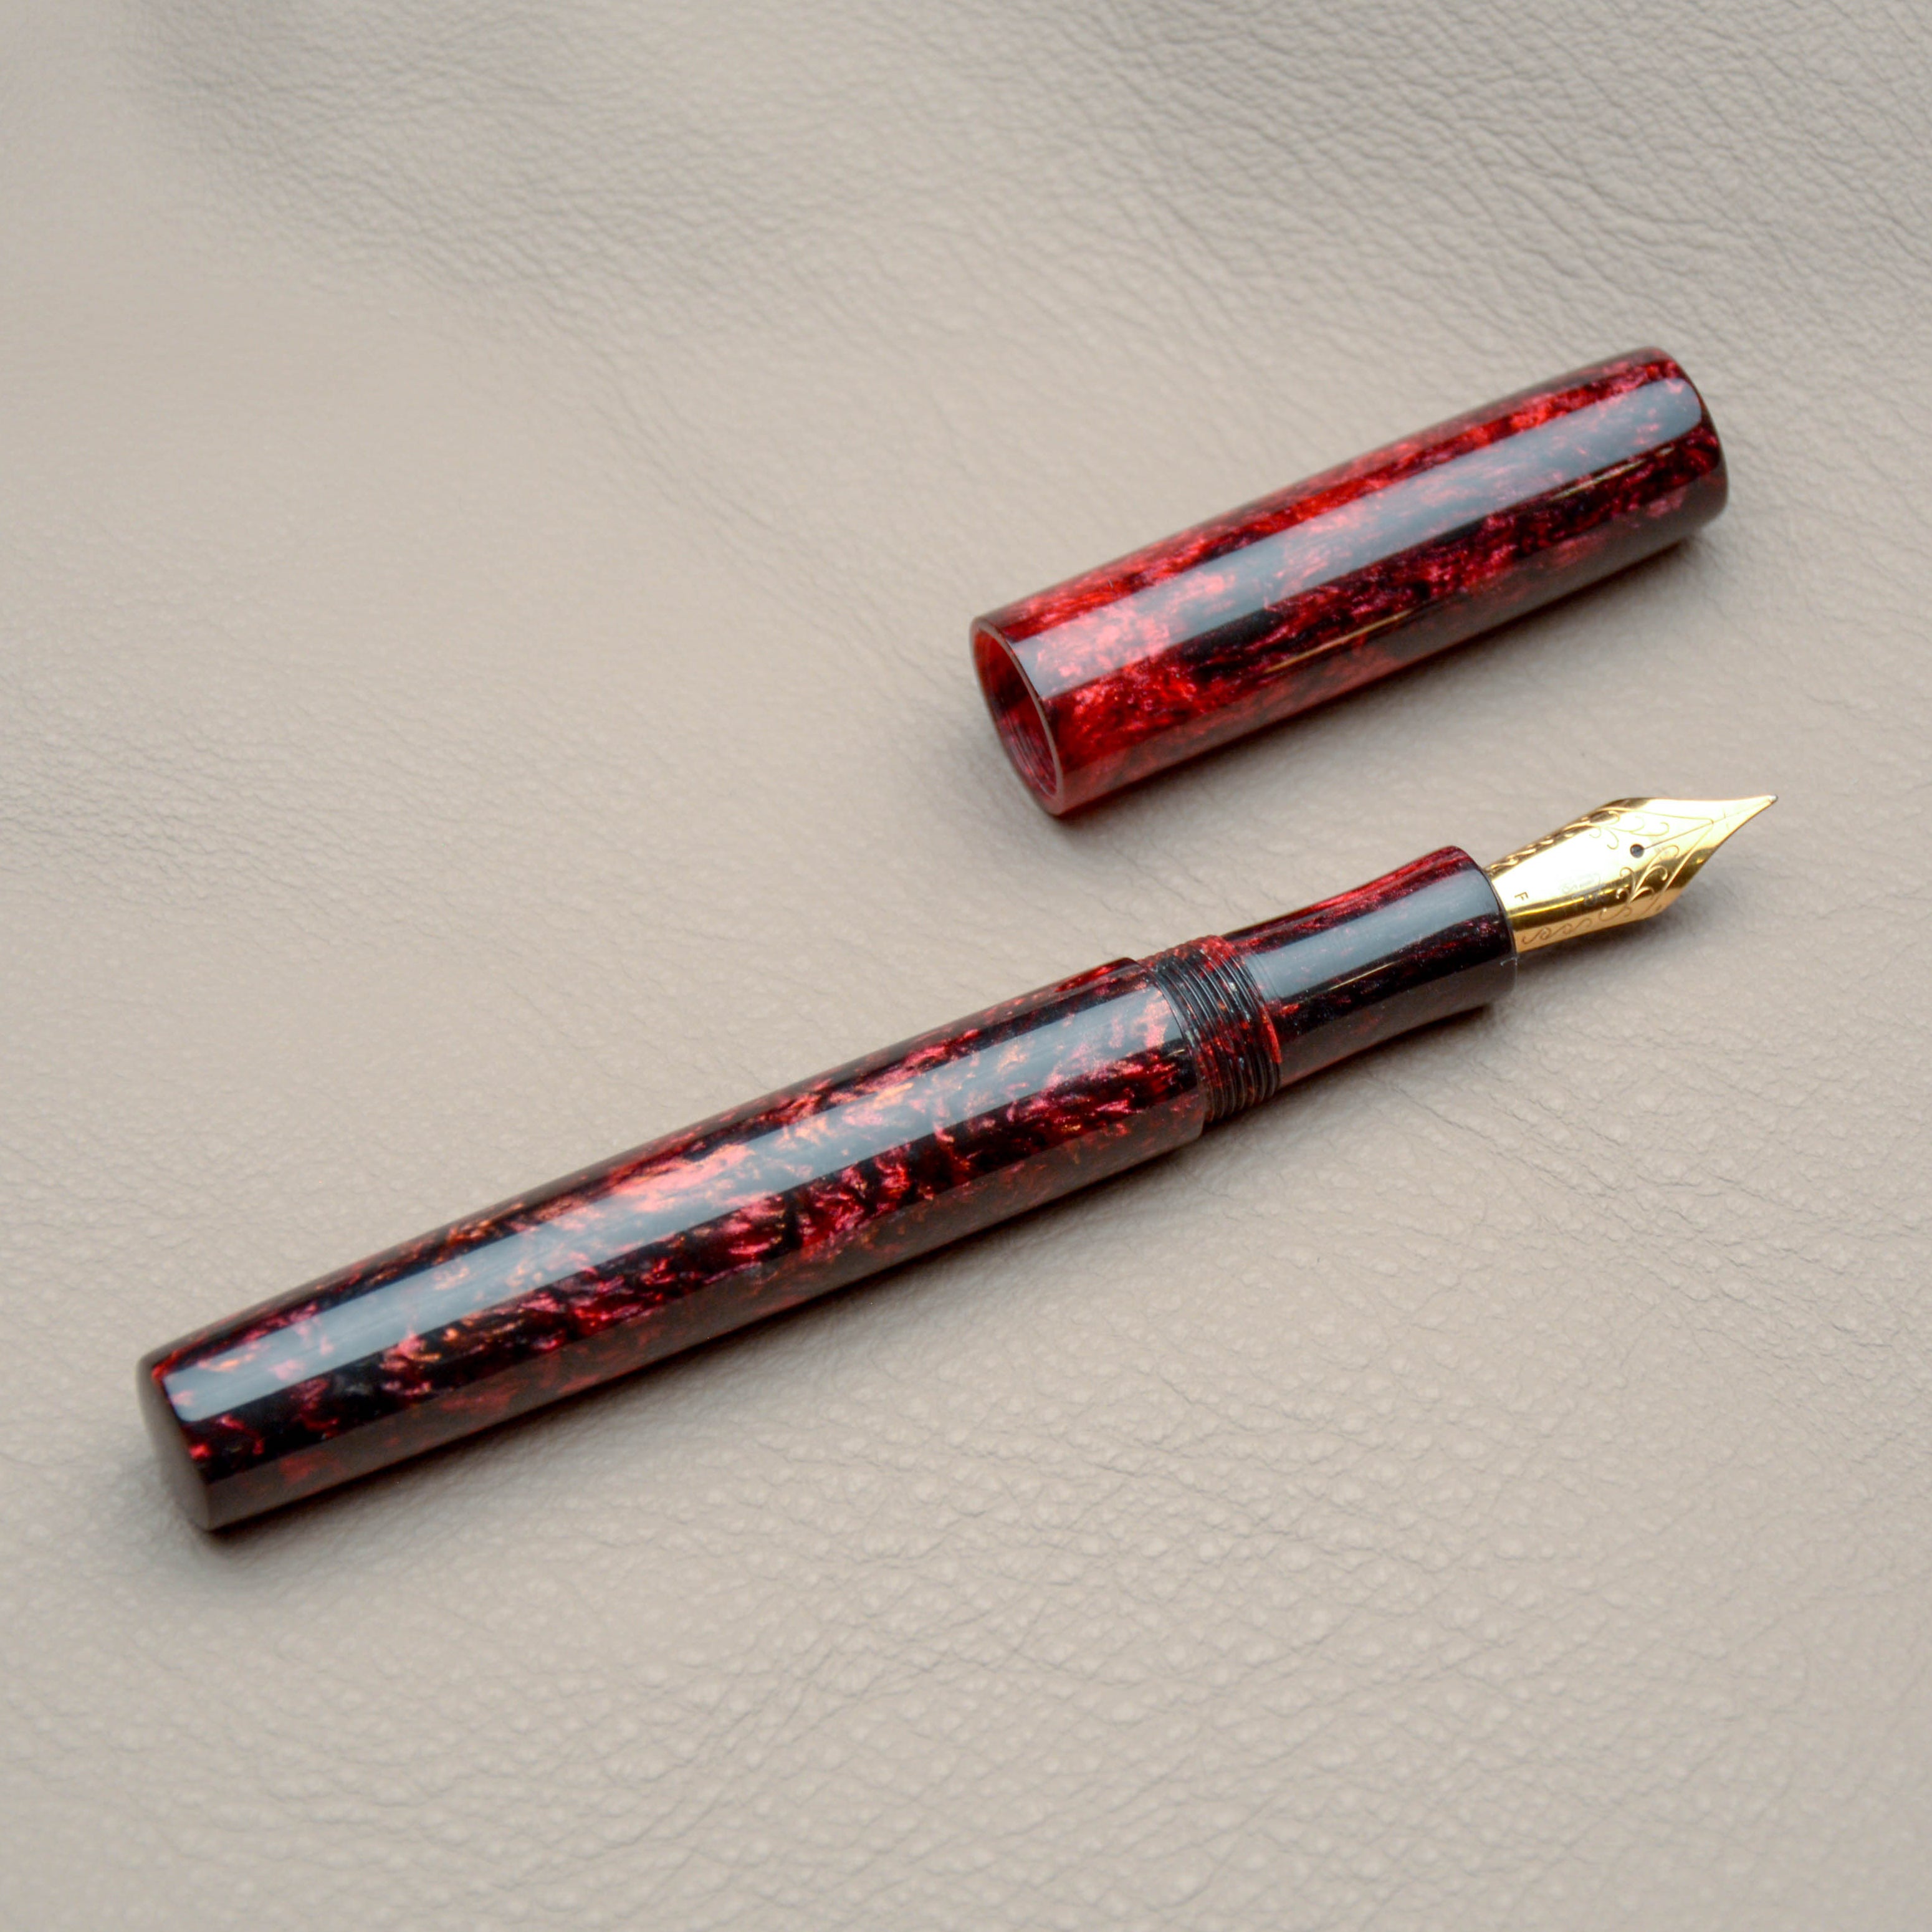 Fountain Pen - JoWo #6 - 13 mm - Turners Warehouse alumilite cast with black, red and copper